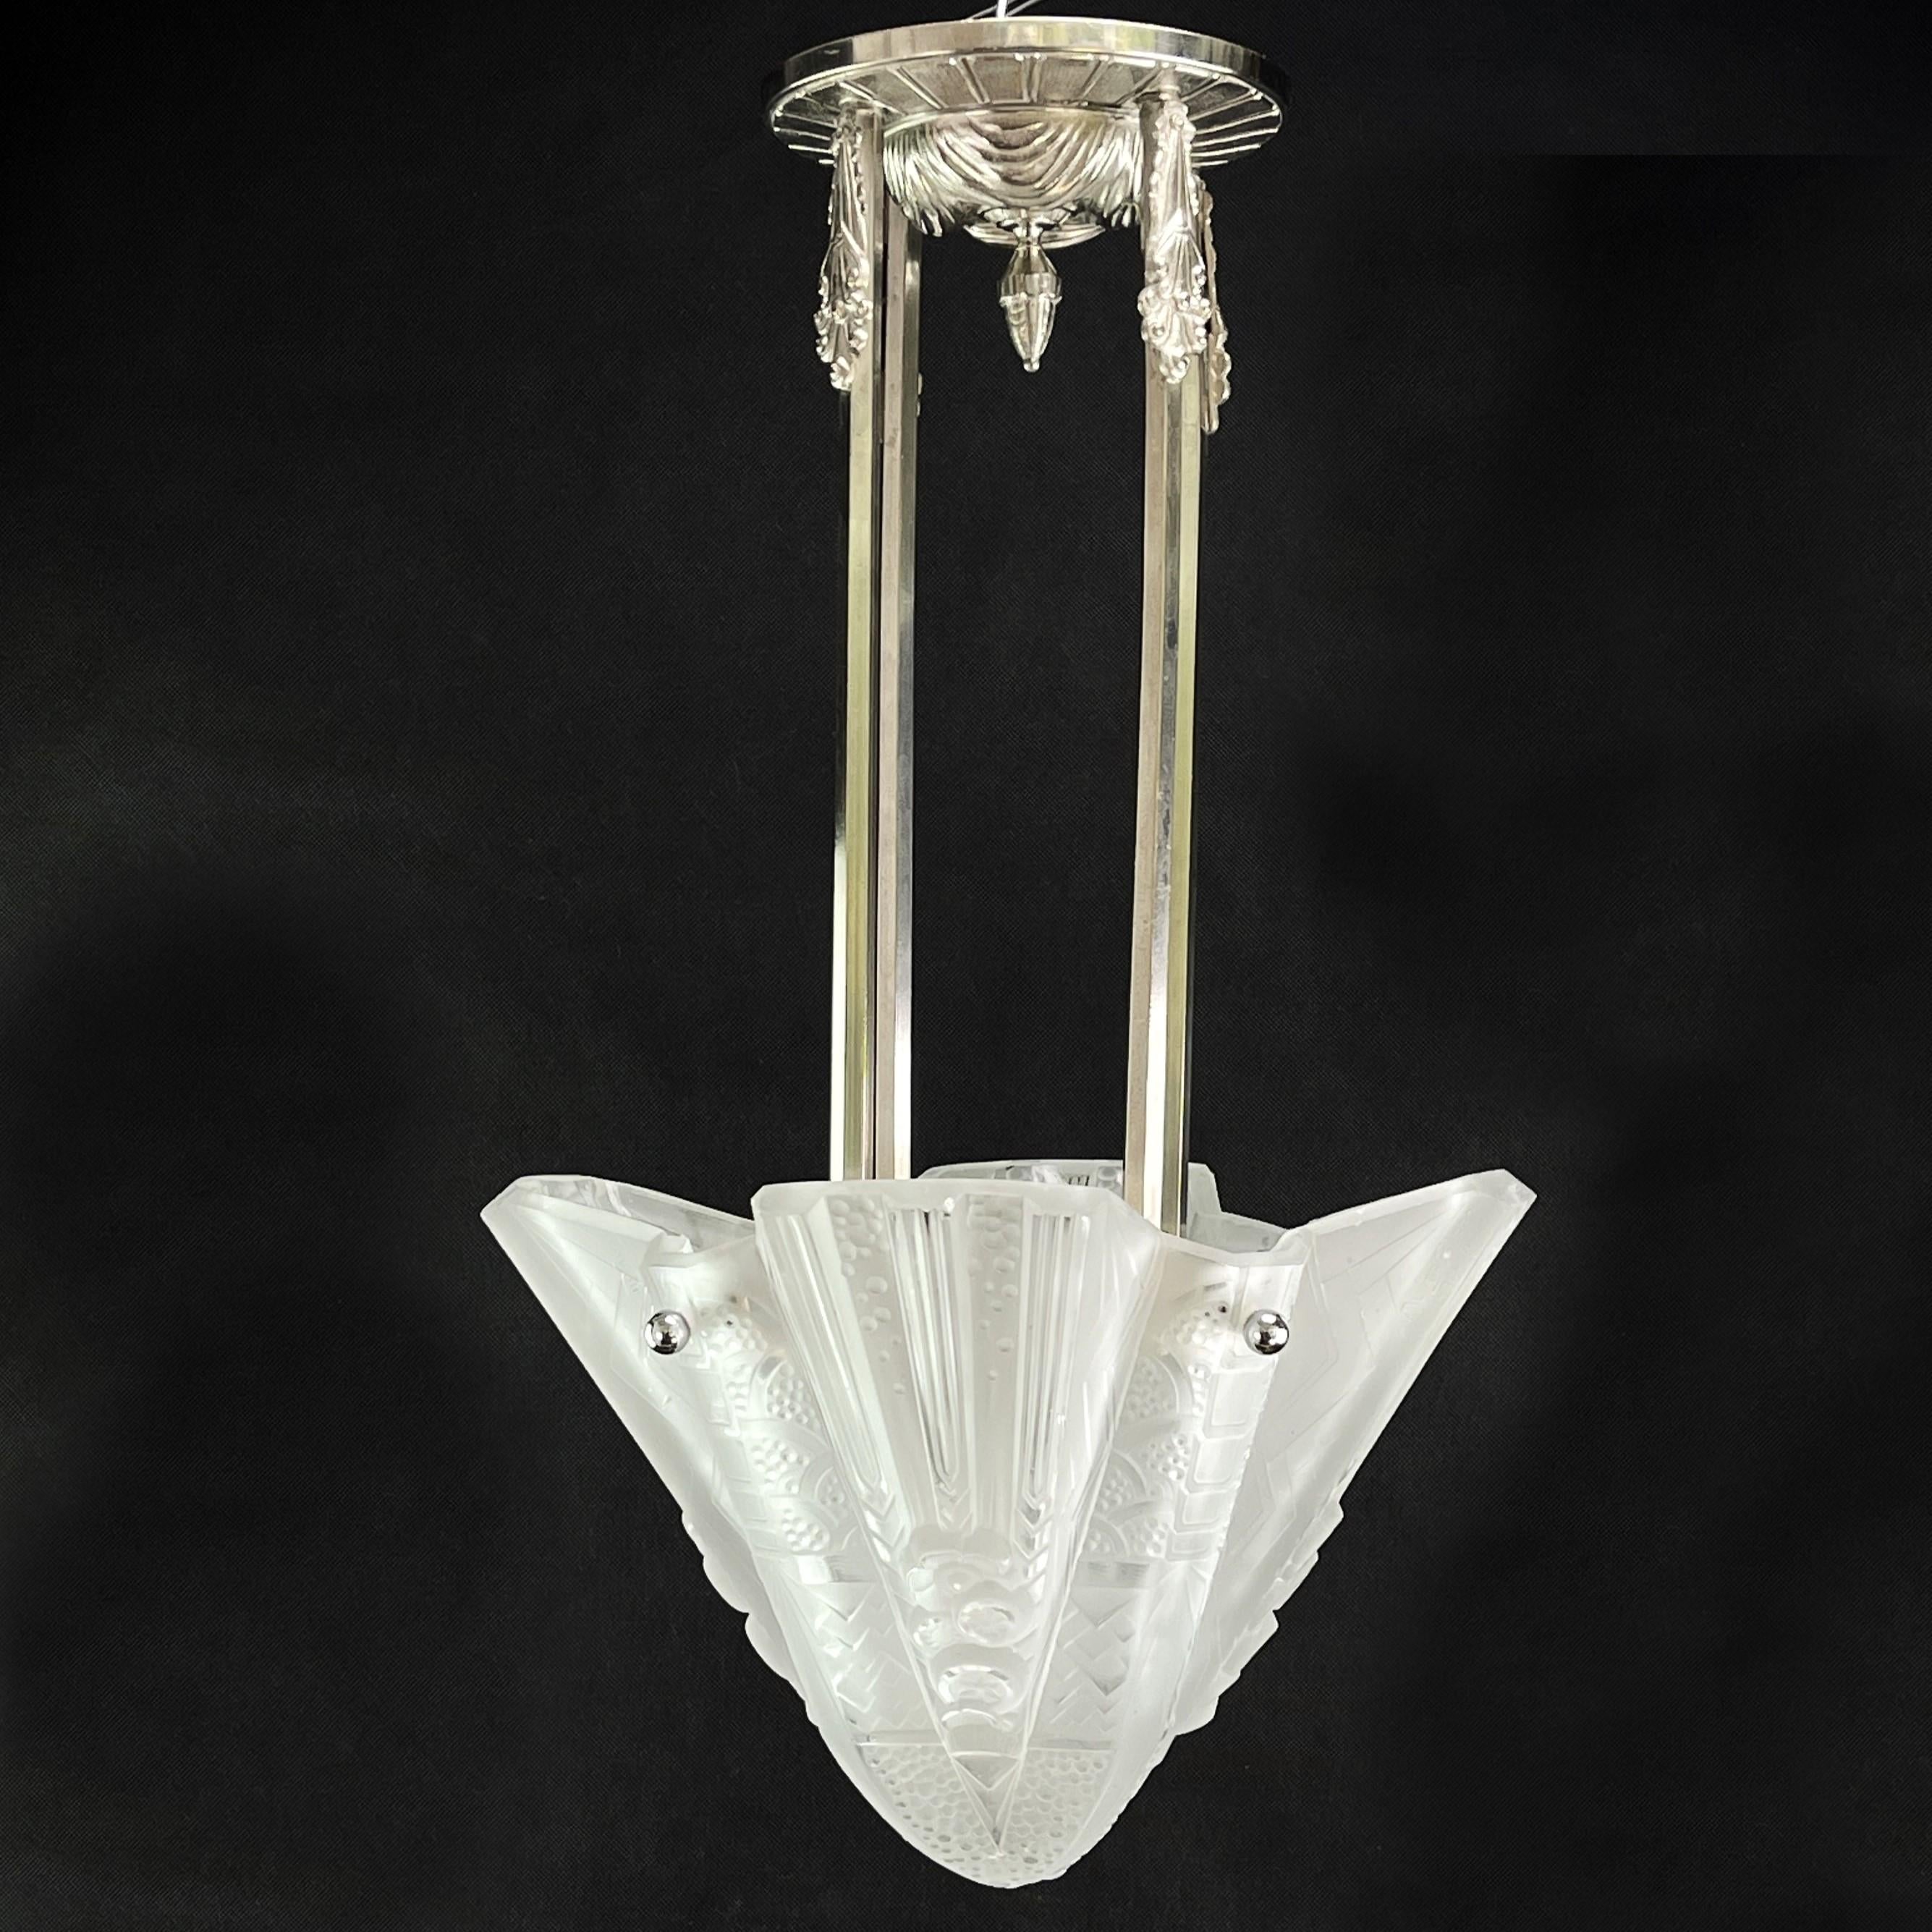 Art Deco chandeliers by Atelier Petitot & Muller Freres Luneville

The ART DECO ceiling lamp is a remarkable example of early 20th century craftsmanship and style. The signature 